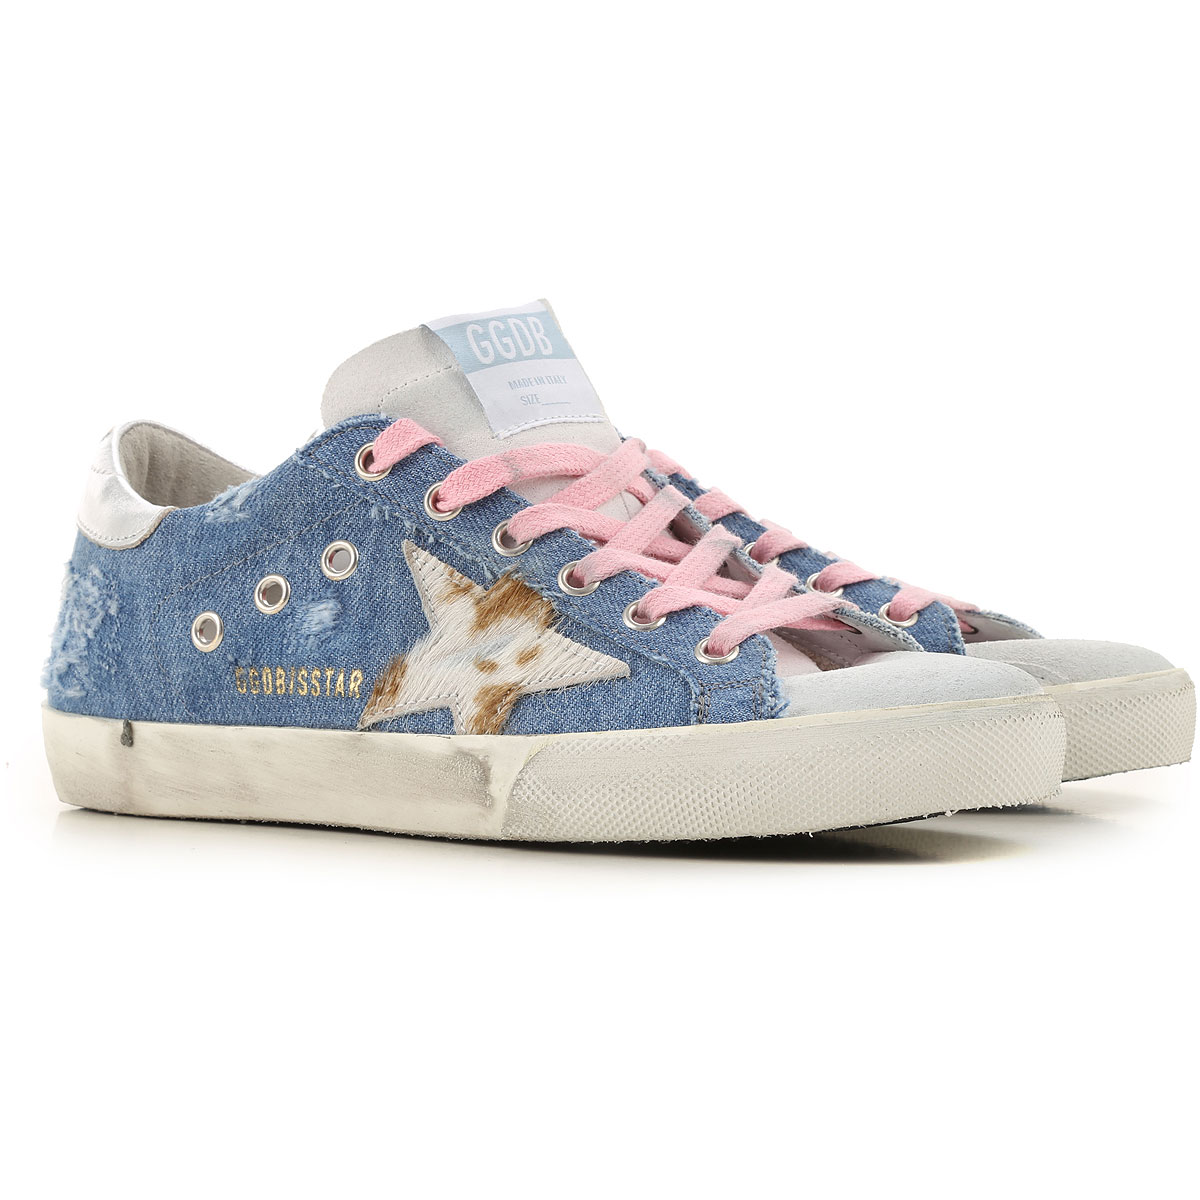 Womens Shoes Golden Goose, Style code: g36ws590-s86-